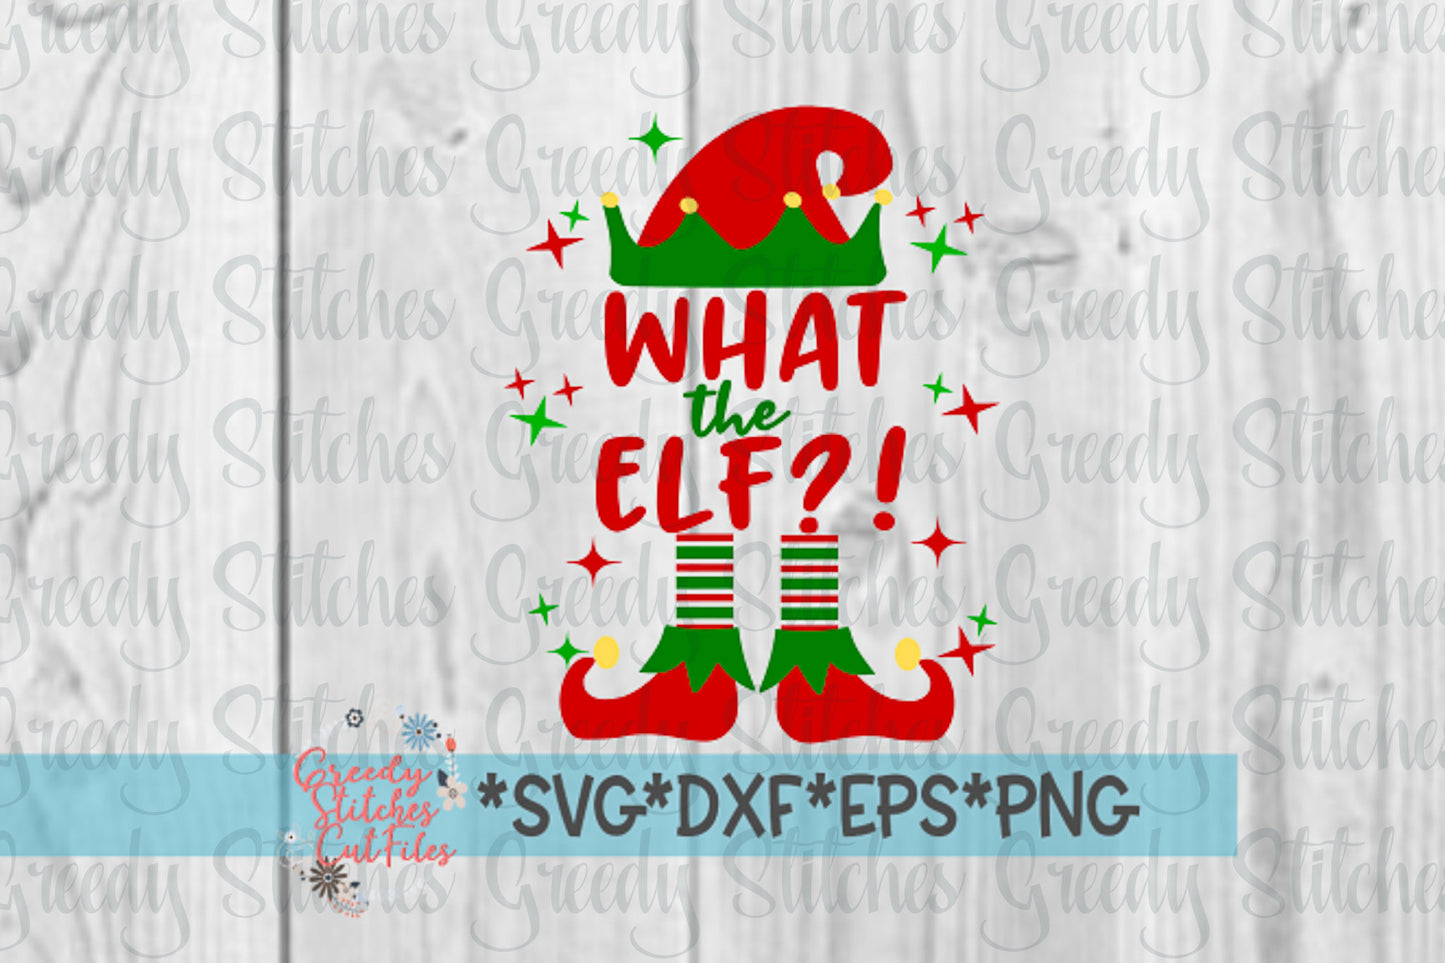 What The Elf?! svg, dxf, eps, png. Elf DxF | What The Elf DxF | What The Elf SvG | Christmas SvG | Instant Download Cut Files. Christmas DxF